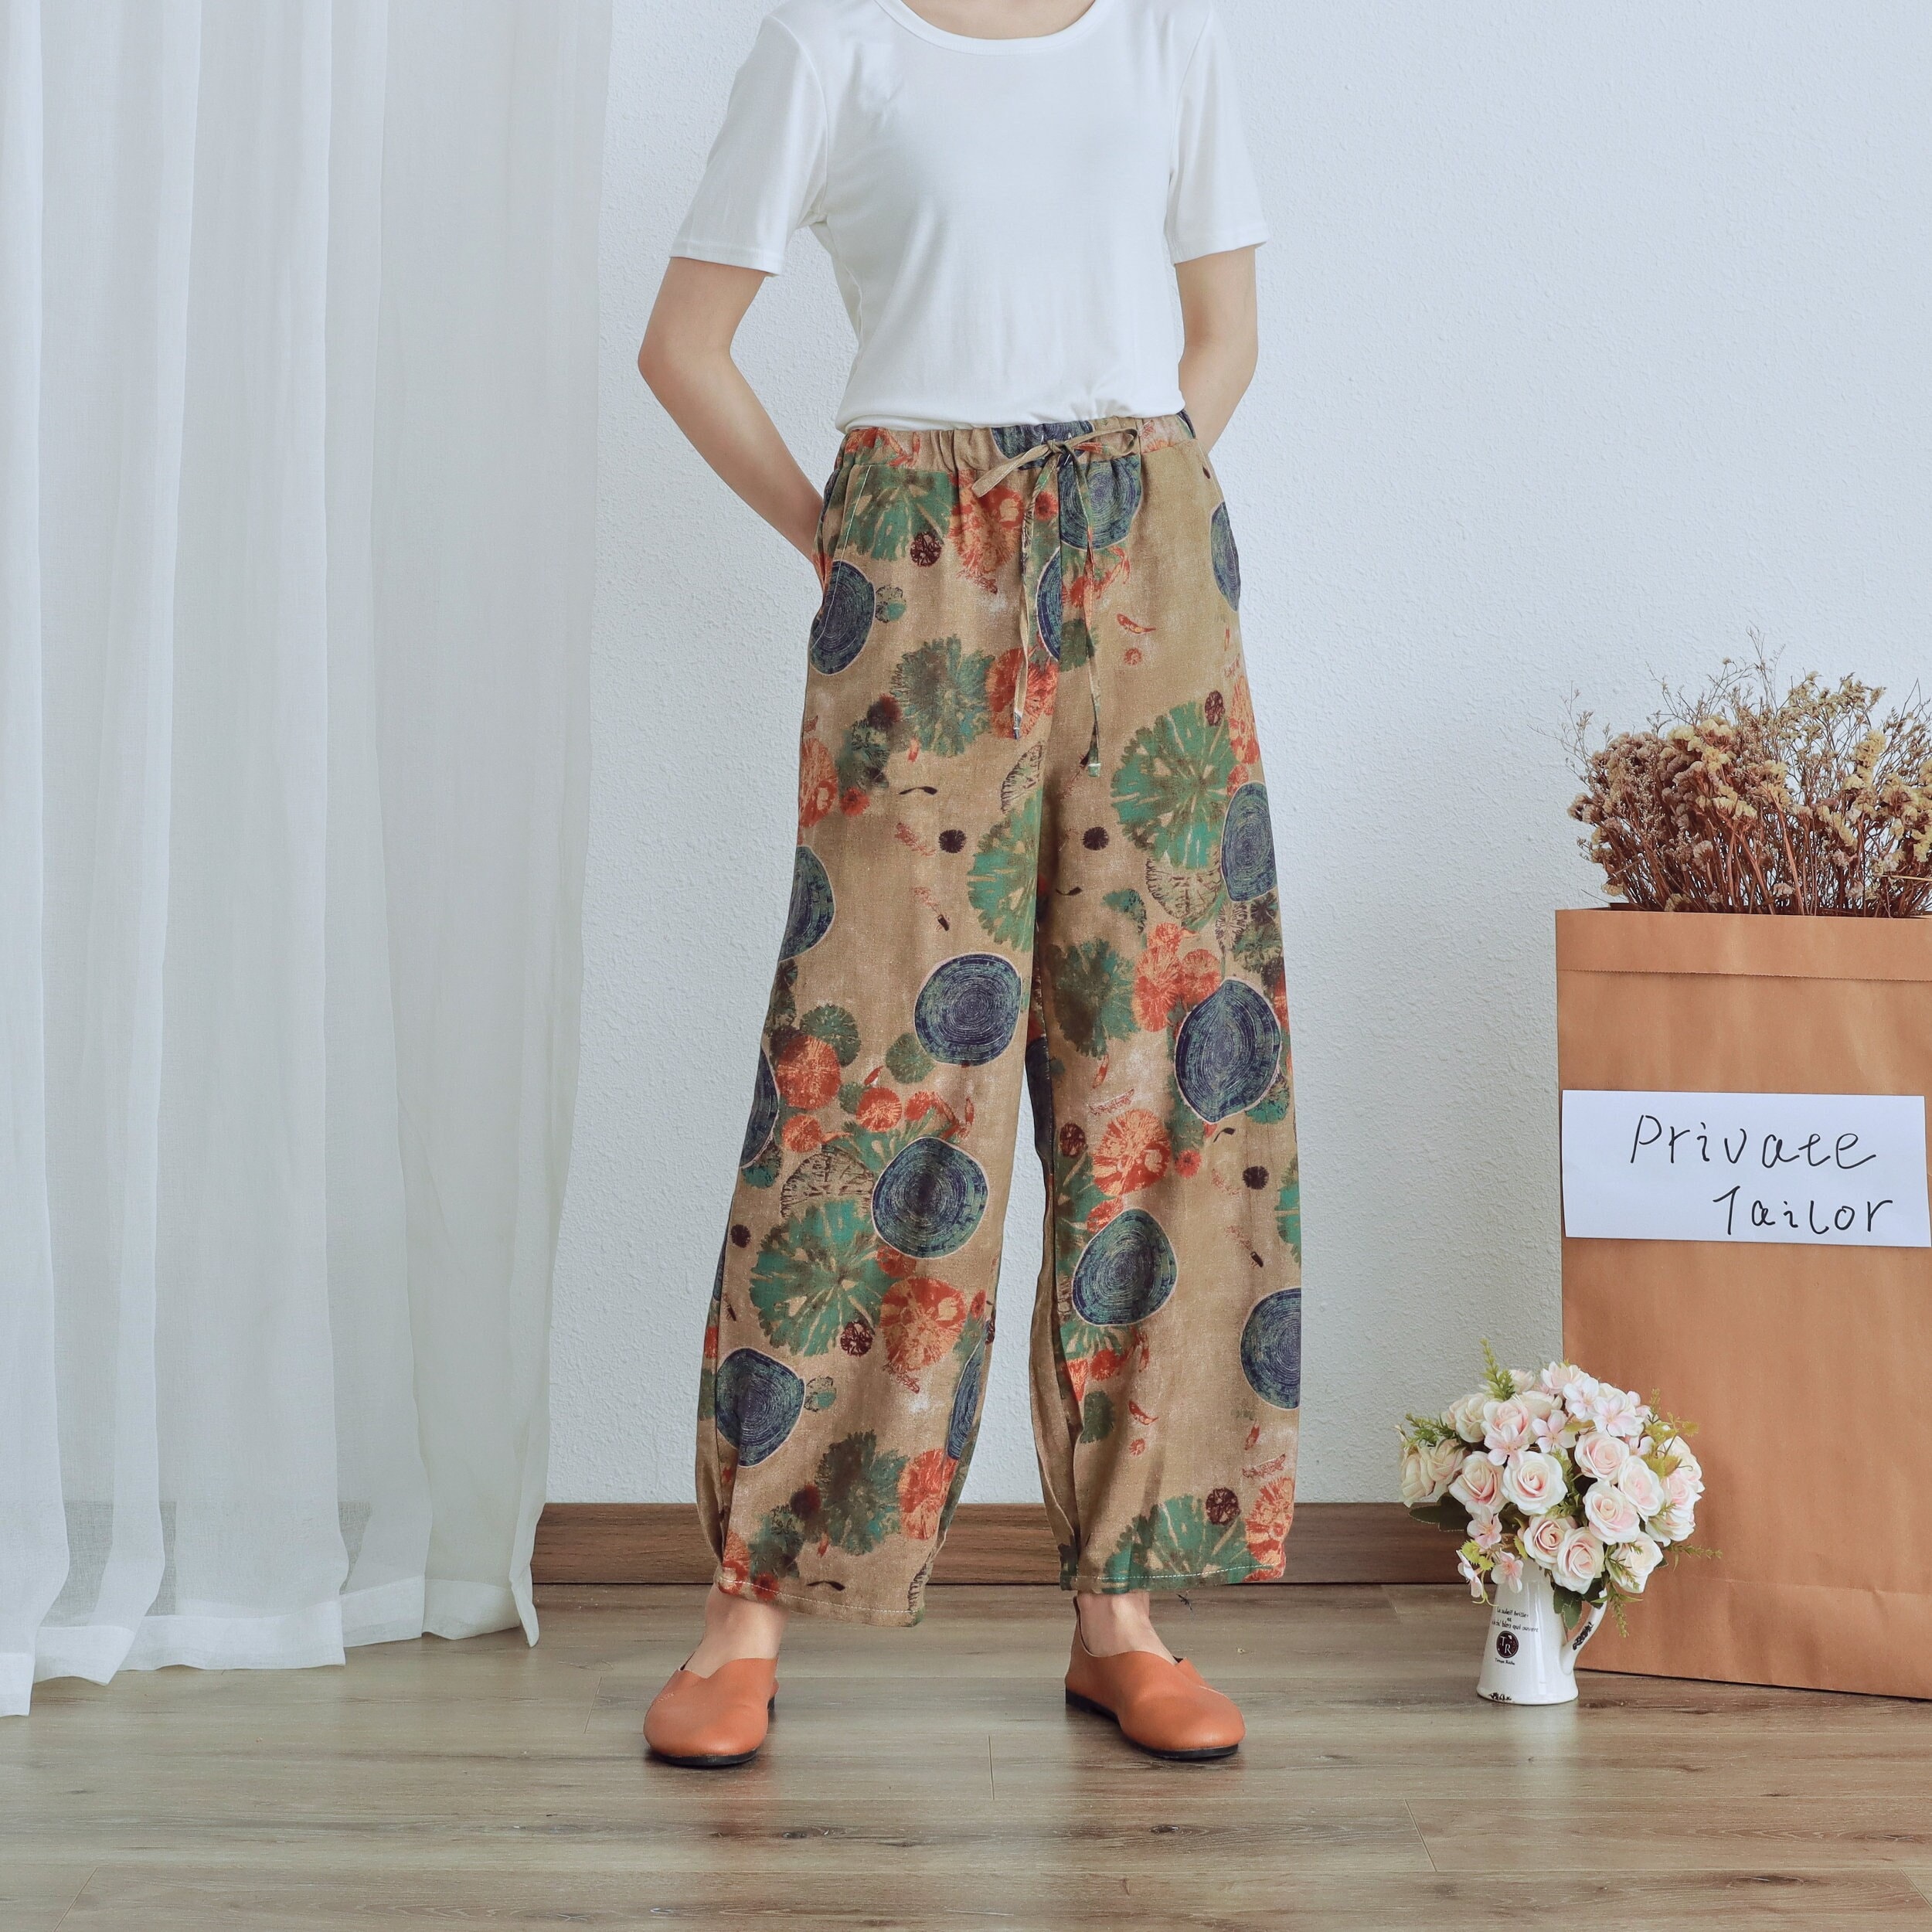 Women Casual Fashion Beach Elastic Waist Wide Leg Trousers Colorful Flower  Print Casual Pants Suits for Women Sexy